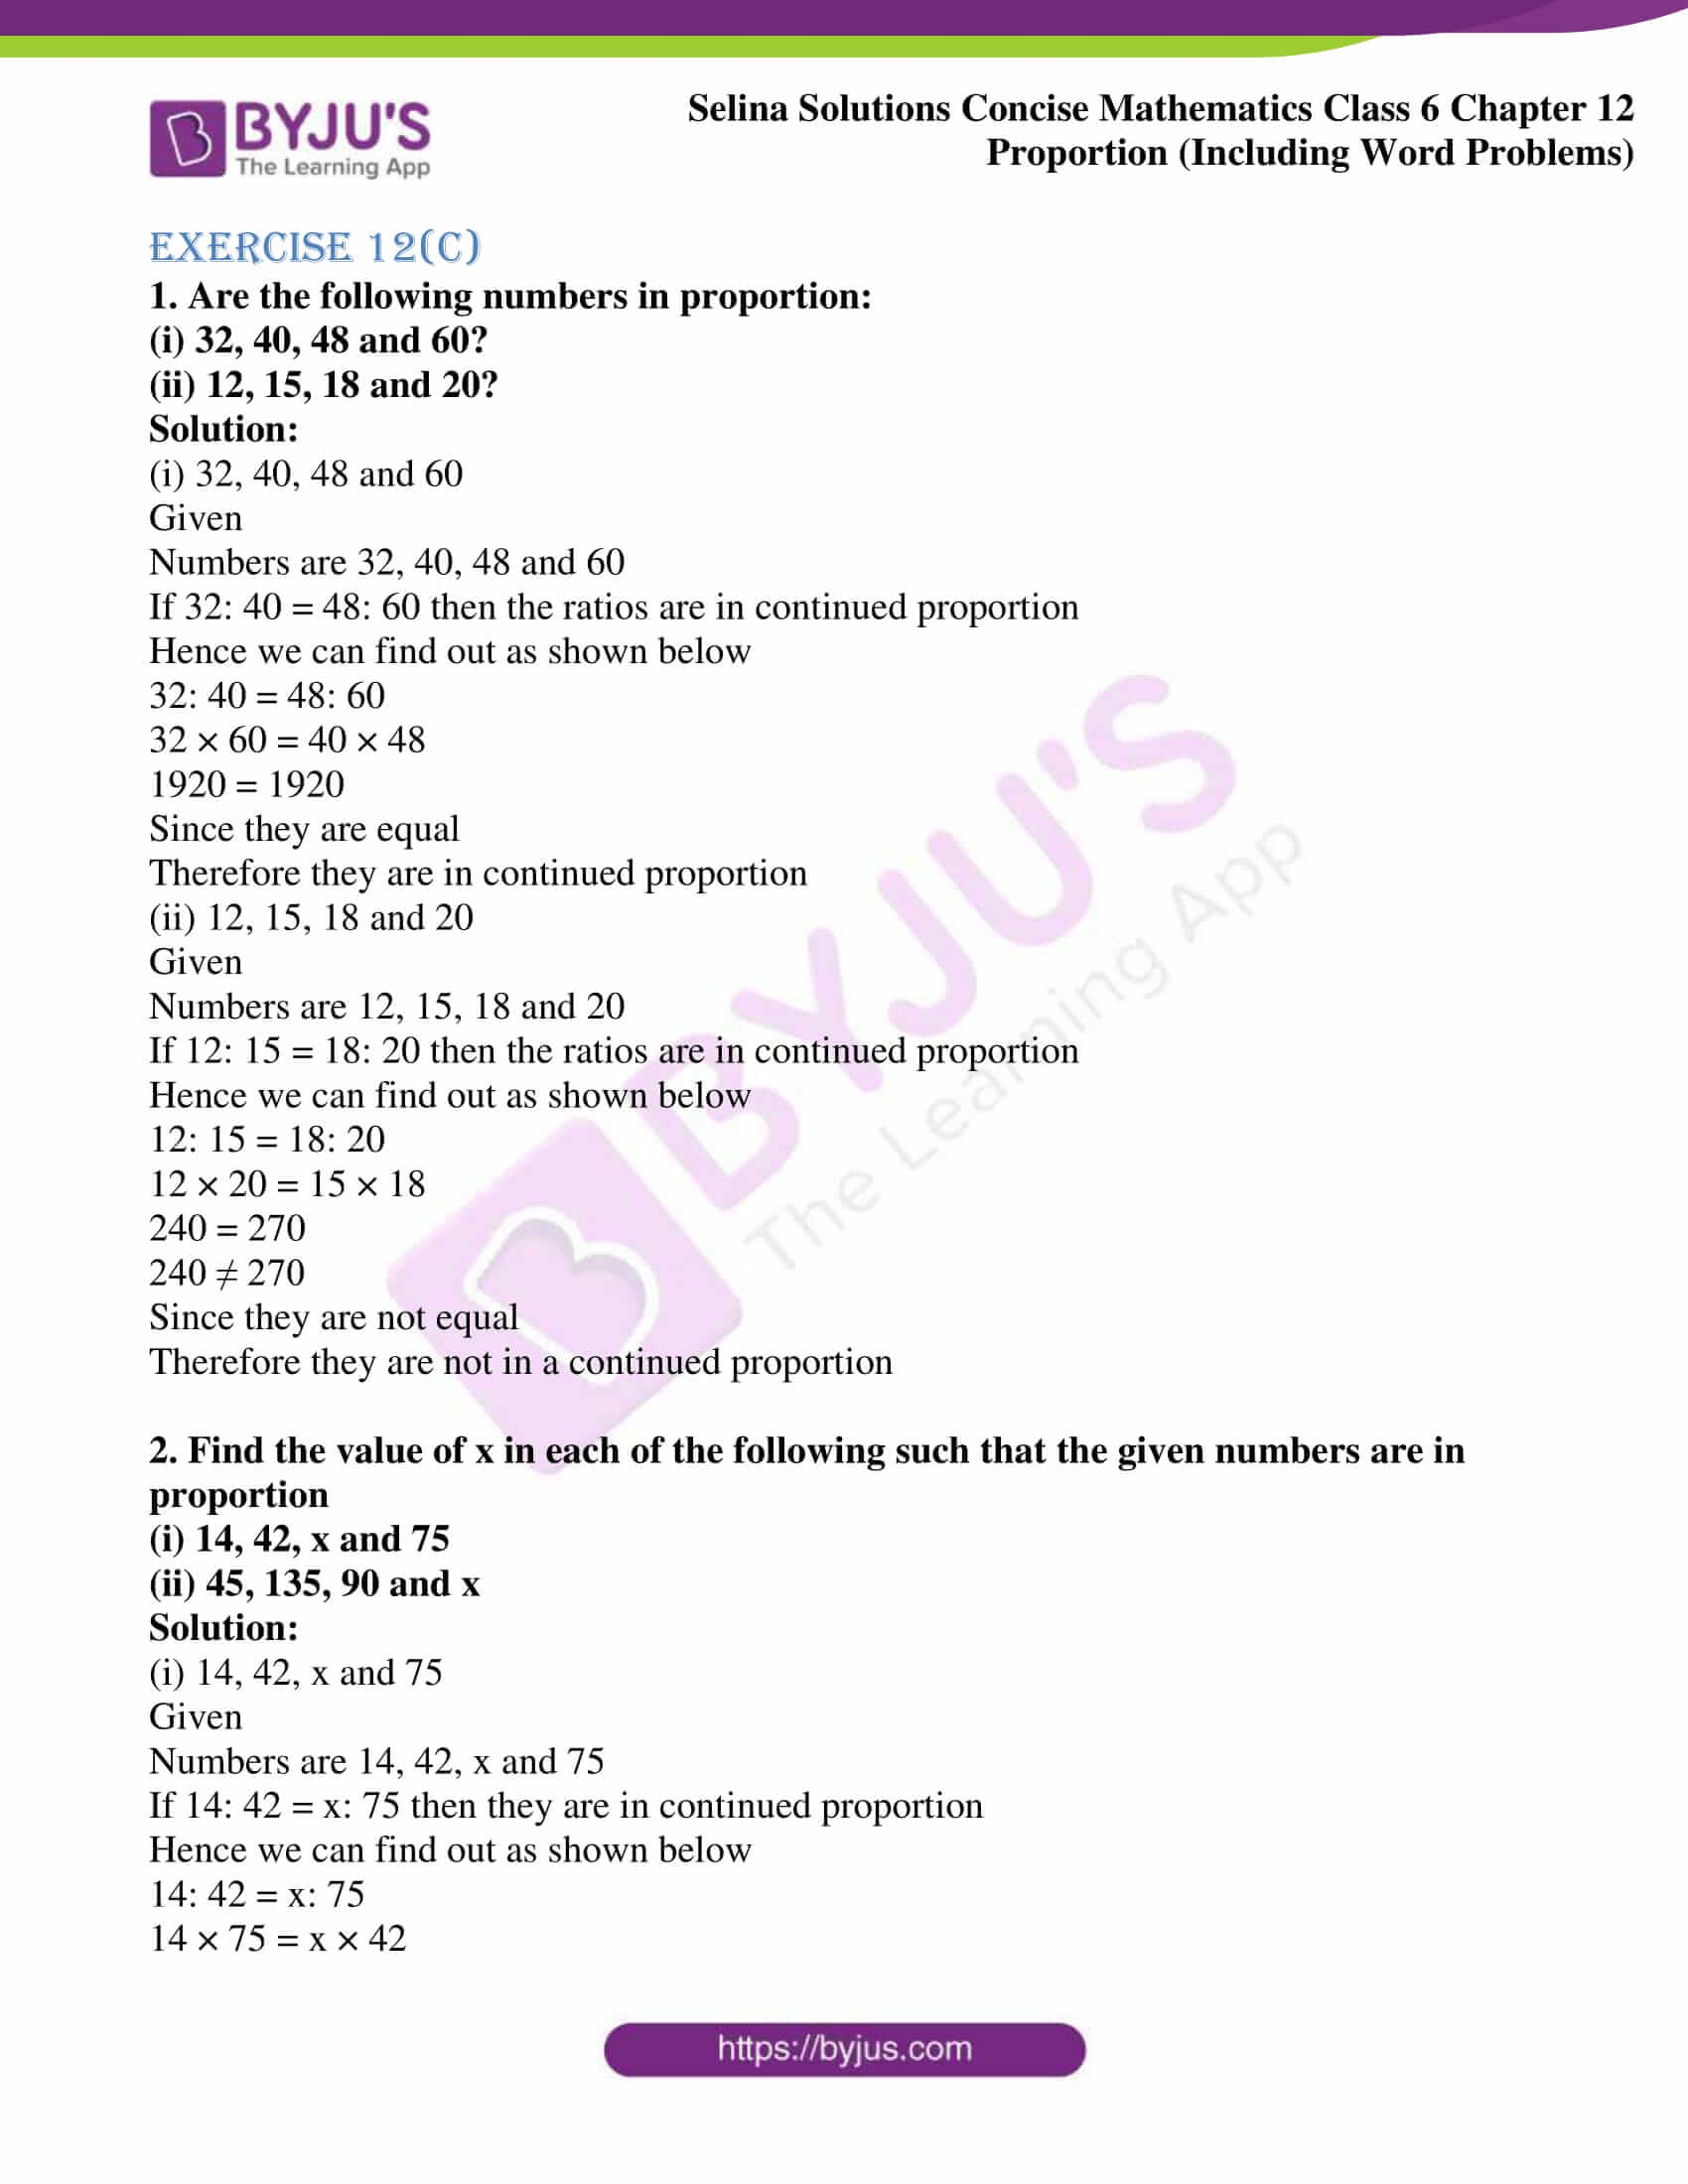 selina-solutions-concise-mathematics-class-6-chapter-12-proportion-exercise-12-c-access-pdf